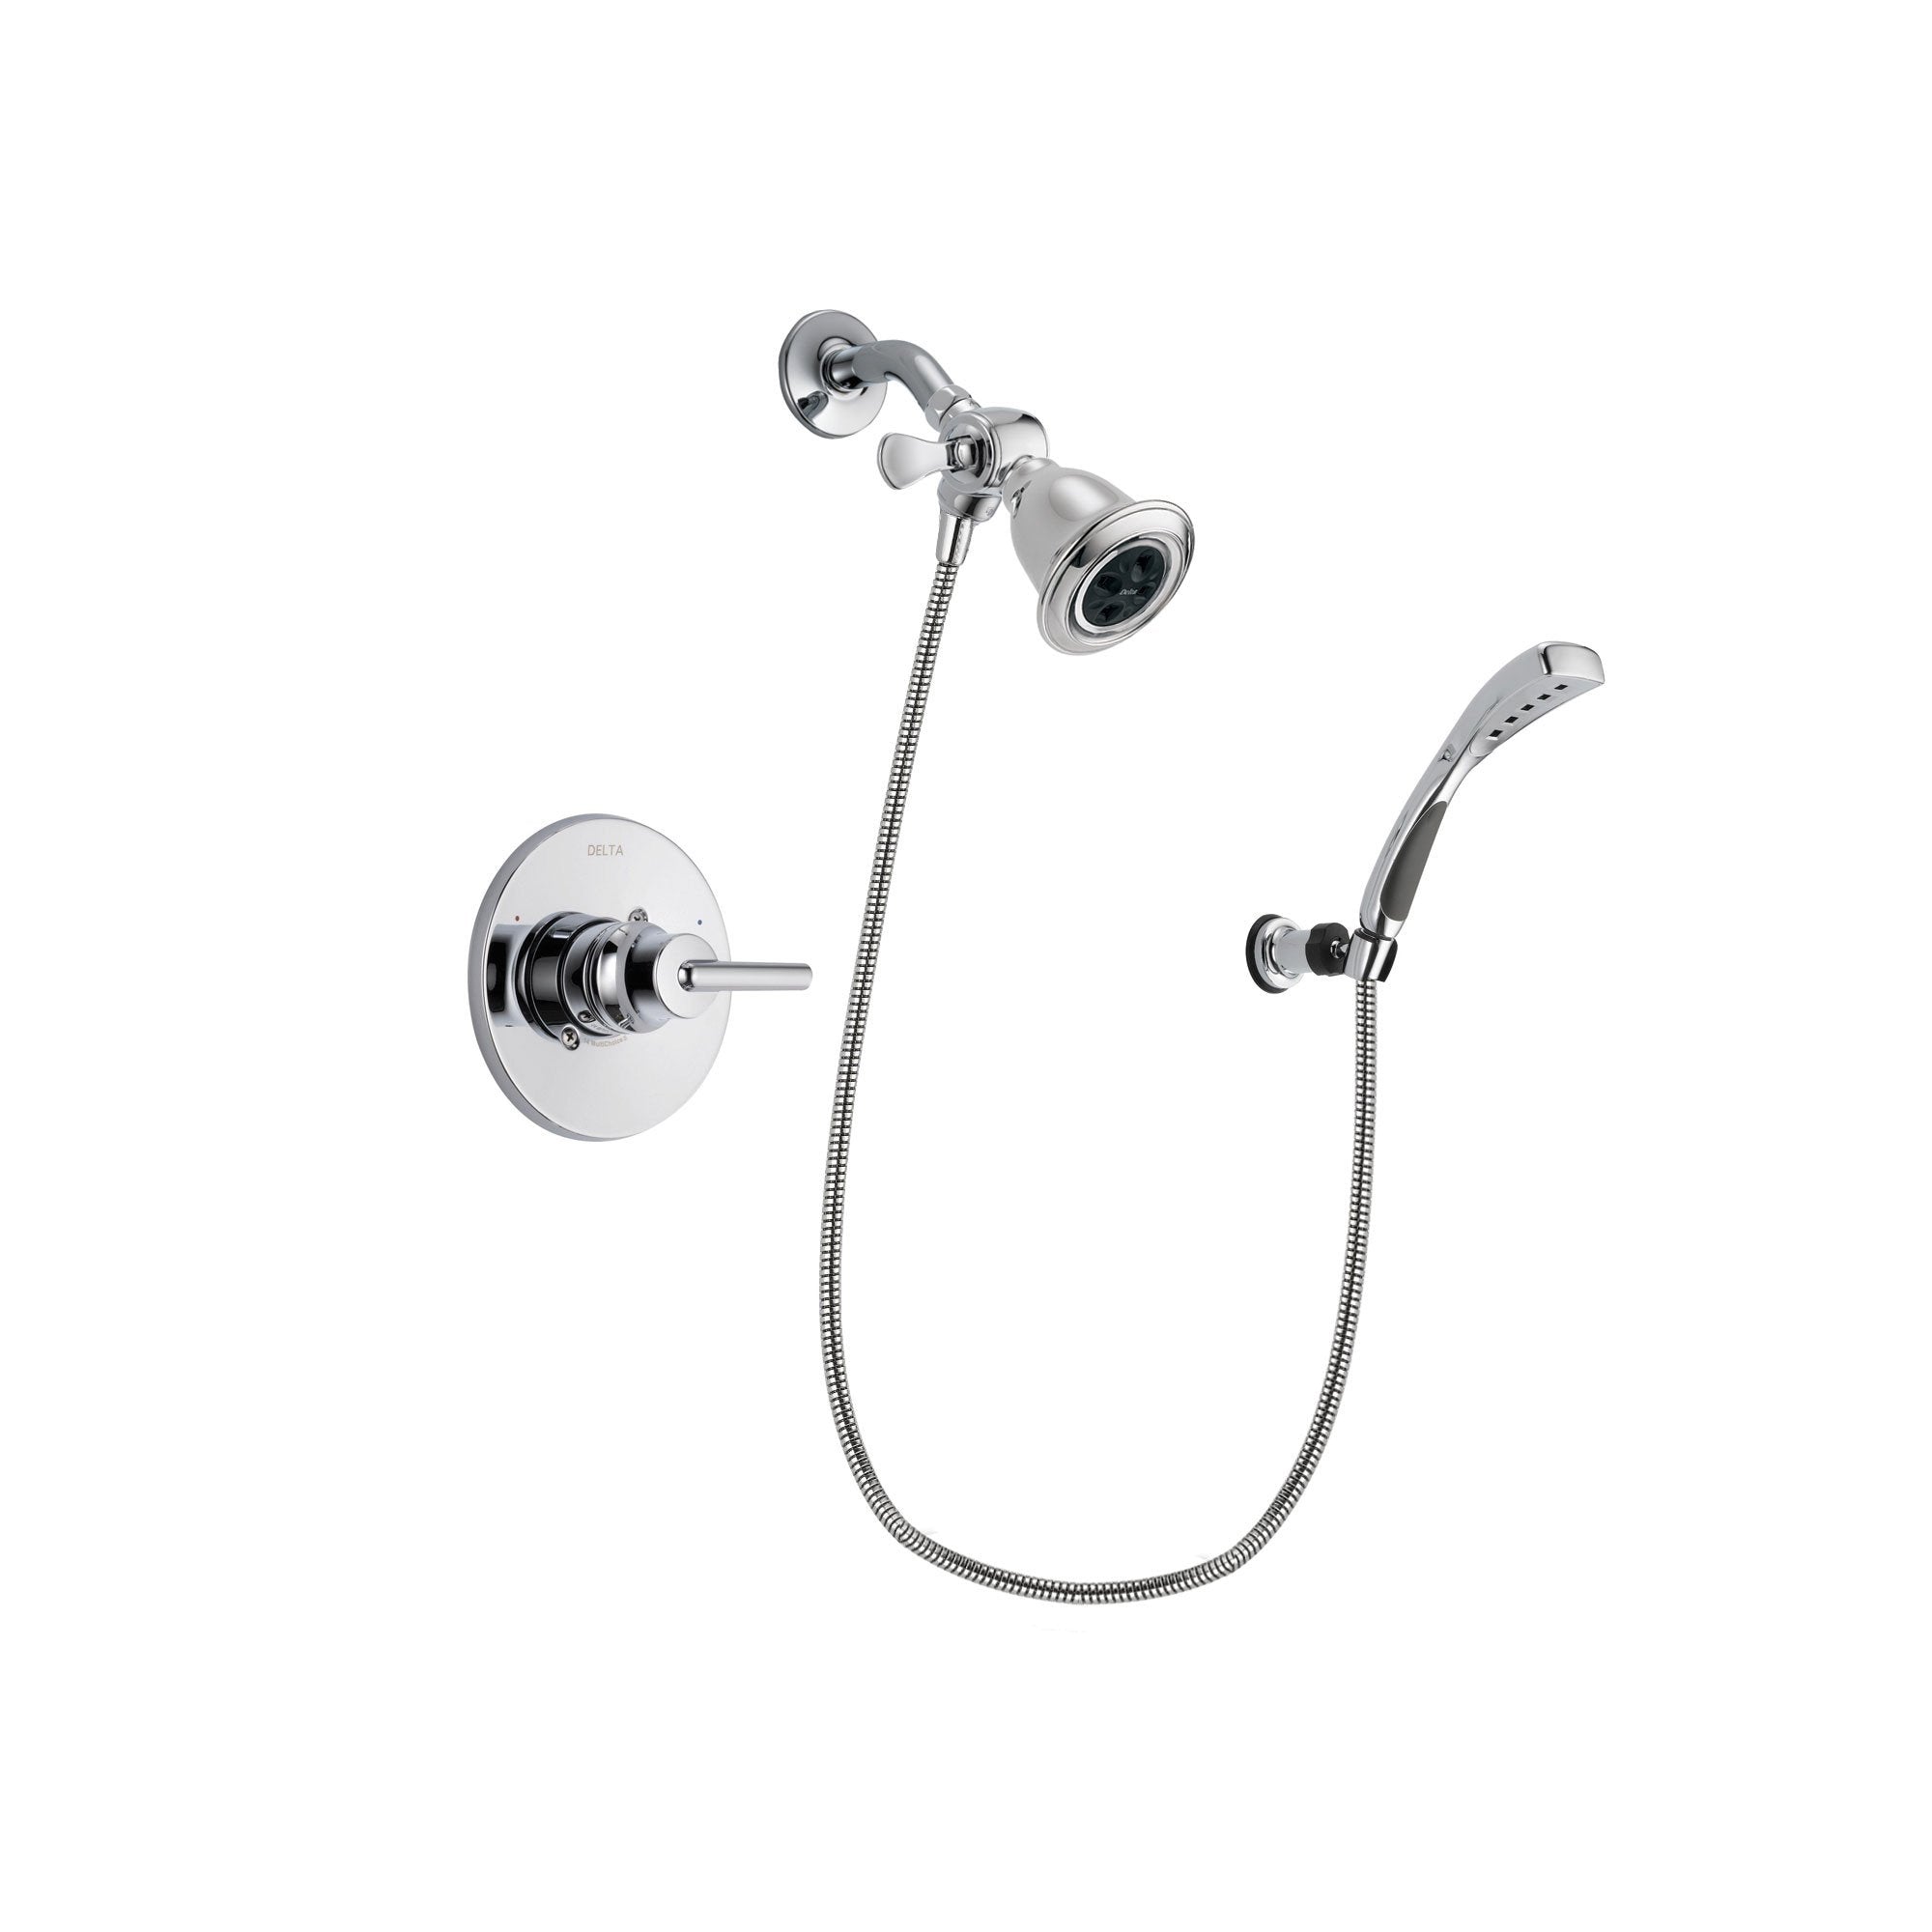 Delta Trinsic Chrome Finish Shower Faucet System Package with Water Efficient Showerhead and Wall-Mount Bracket with Handheld Shower Spray Includes Rough-in Valve DSP1016V